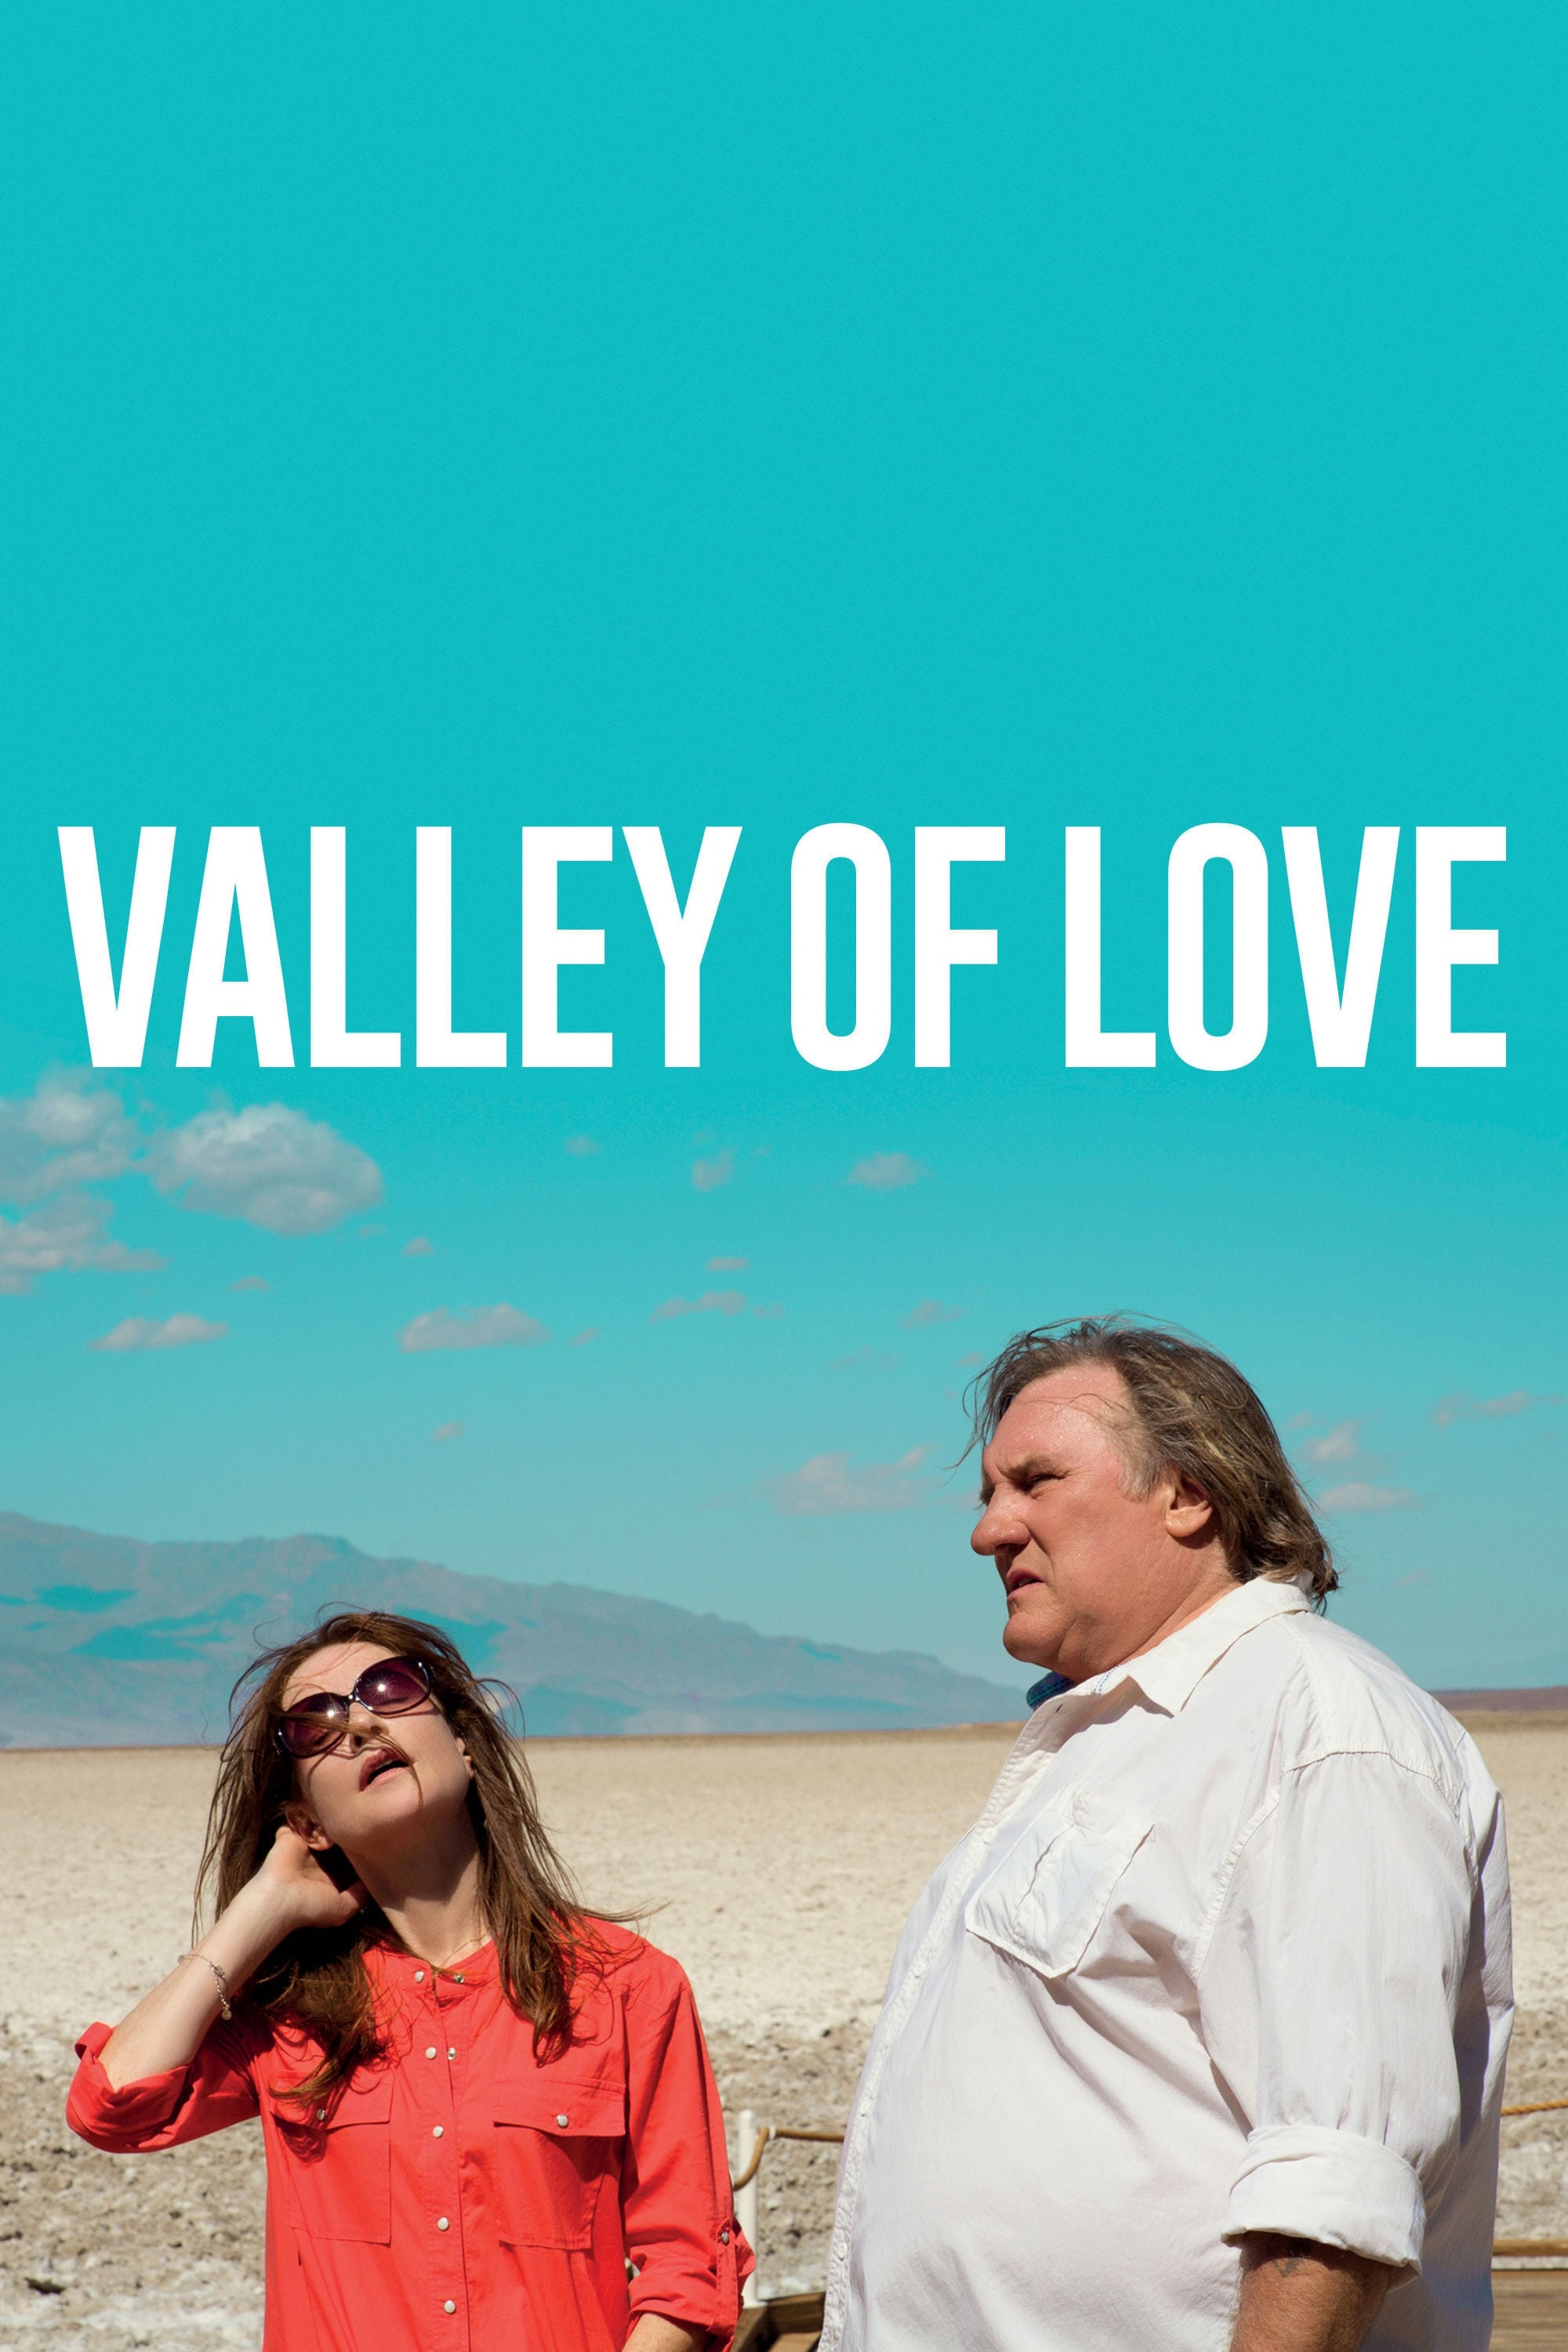 Valley of love streaming